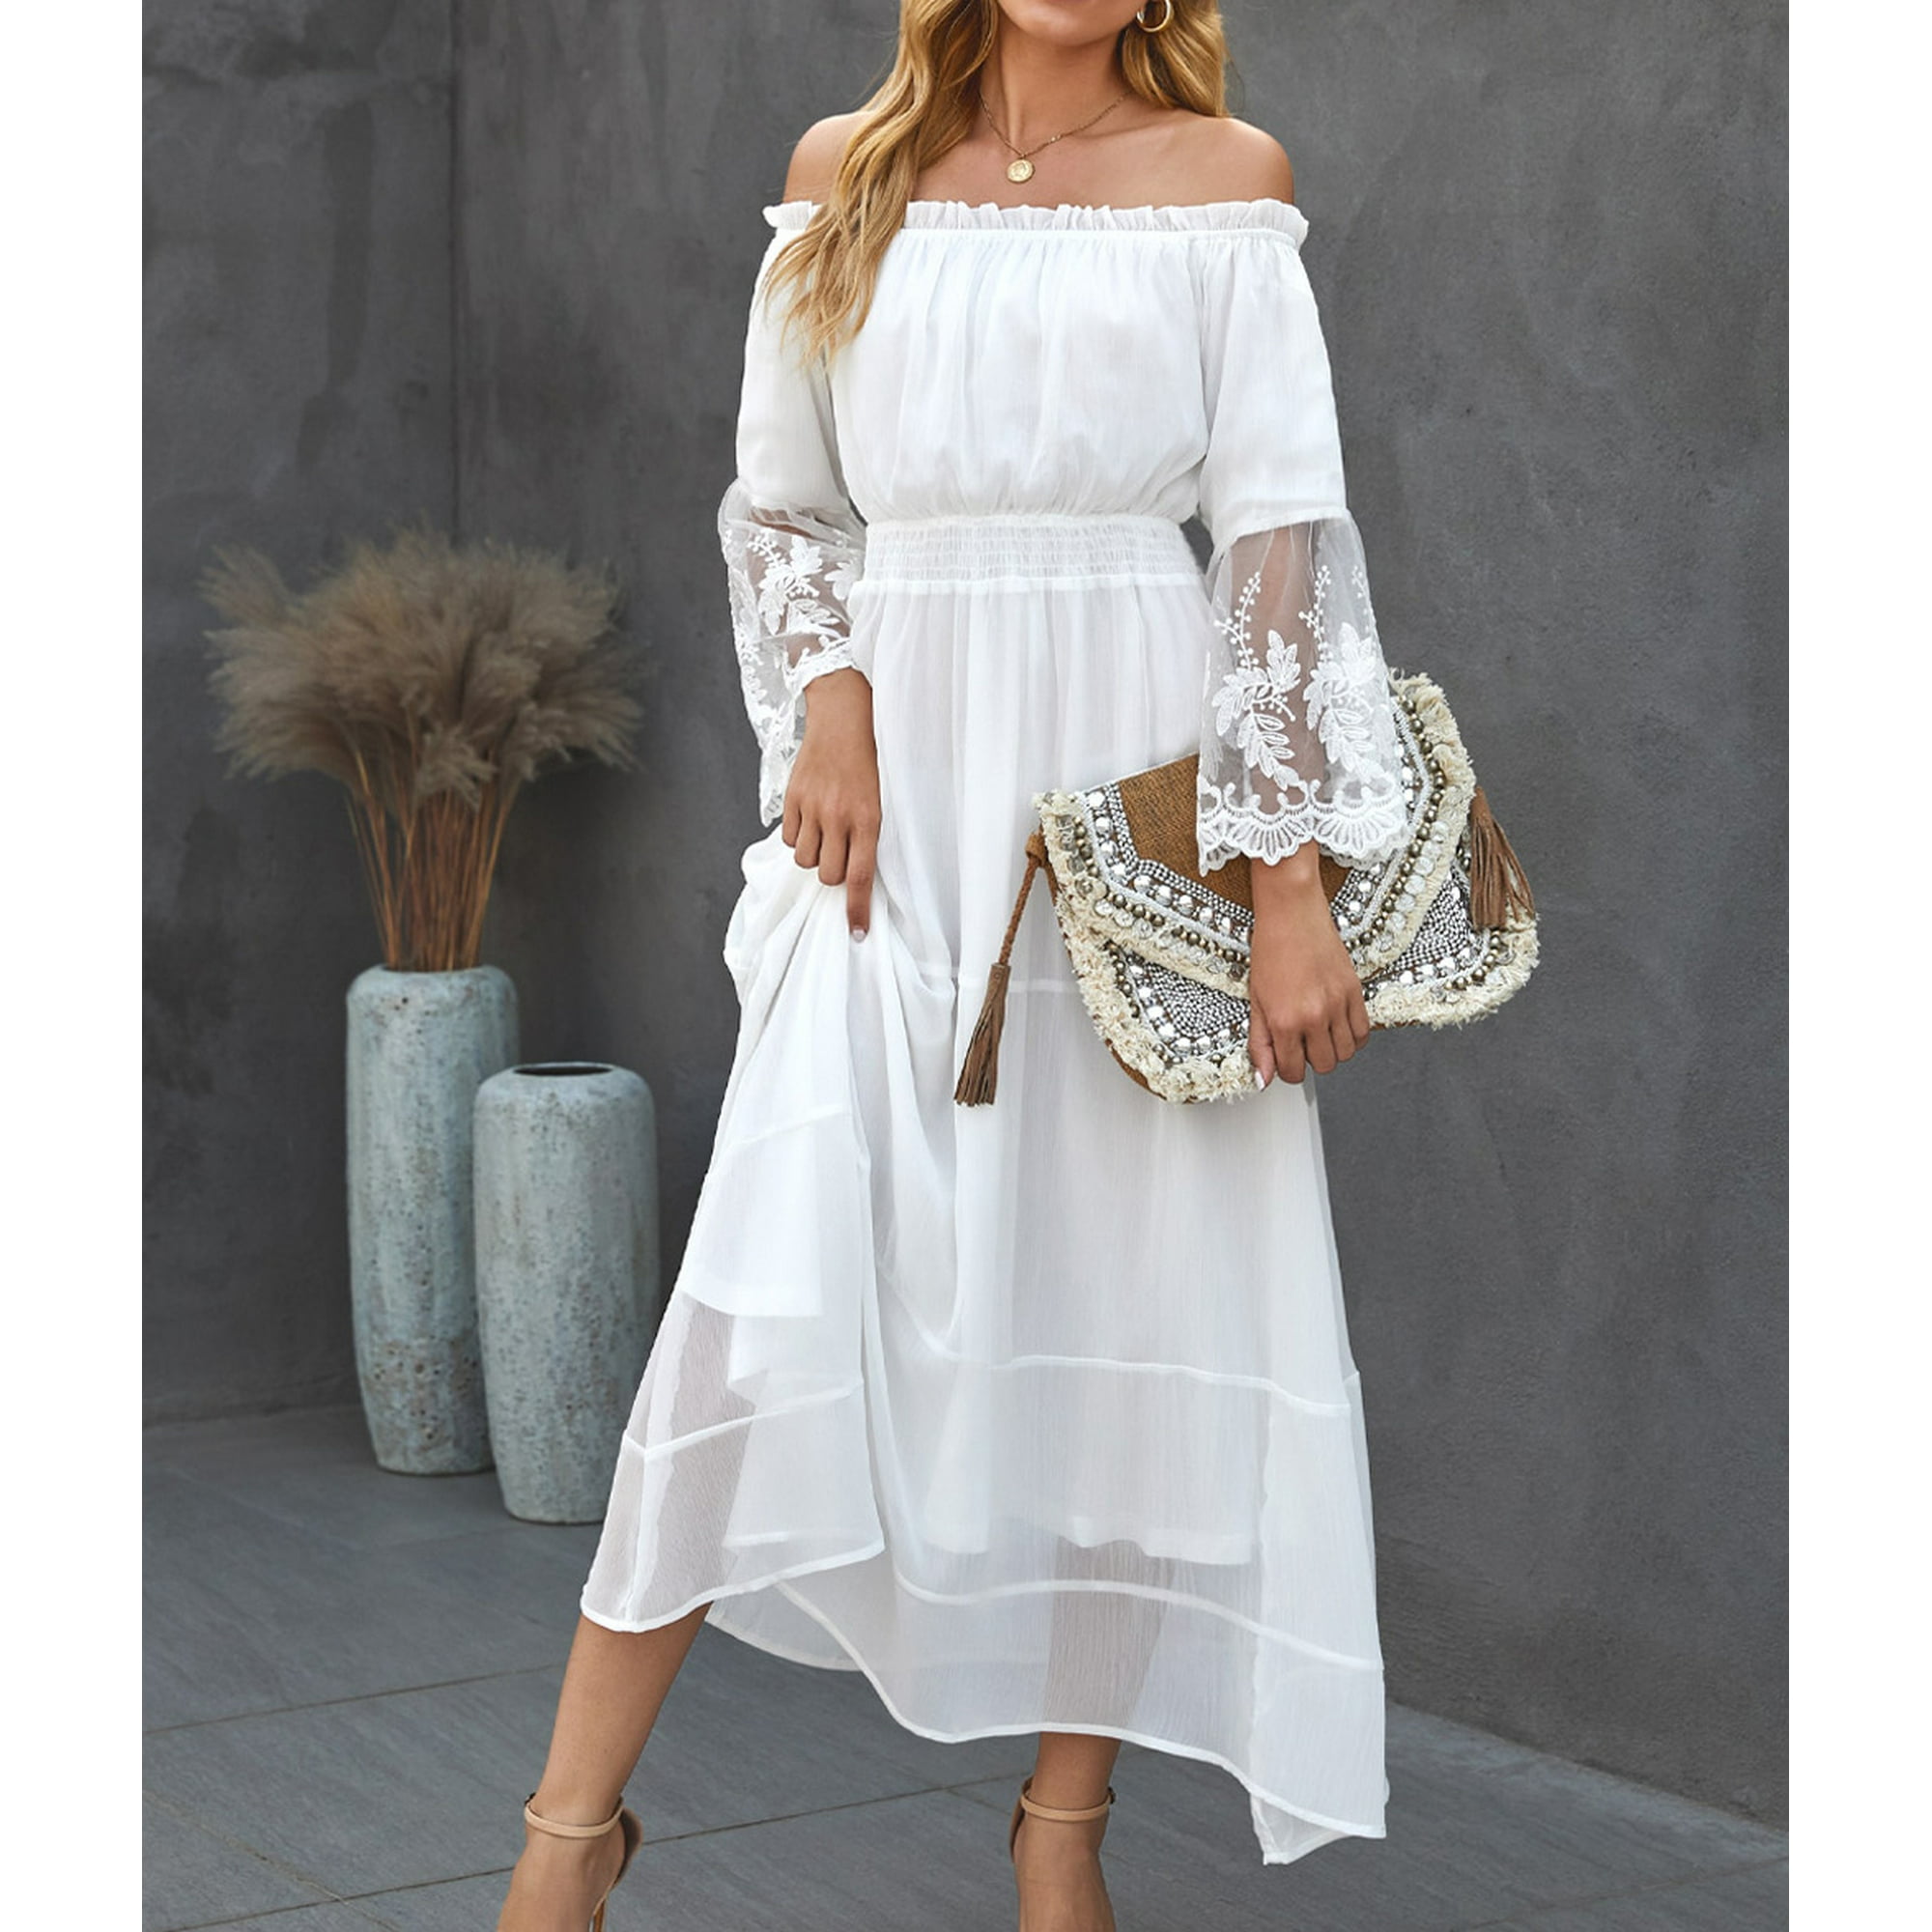 Women's White Off Shoulder Embroidered Flared Sleeve Lace Maxi